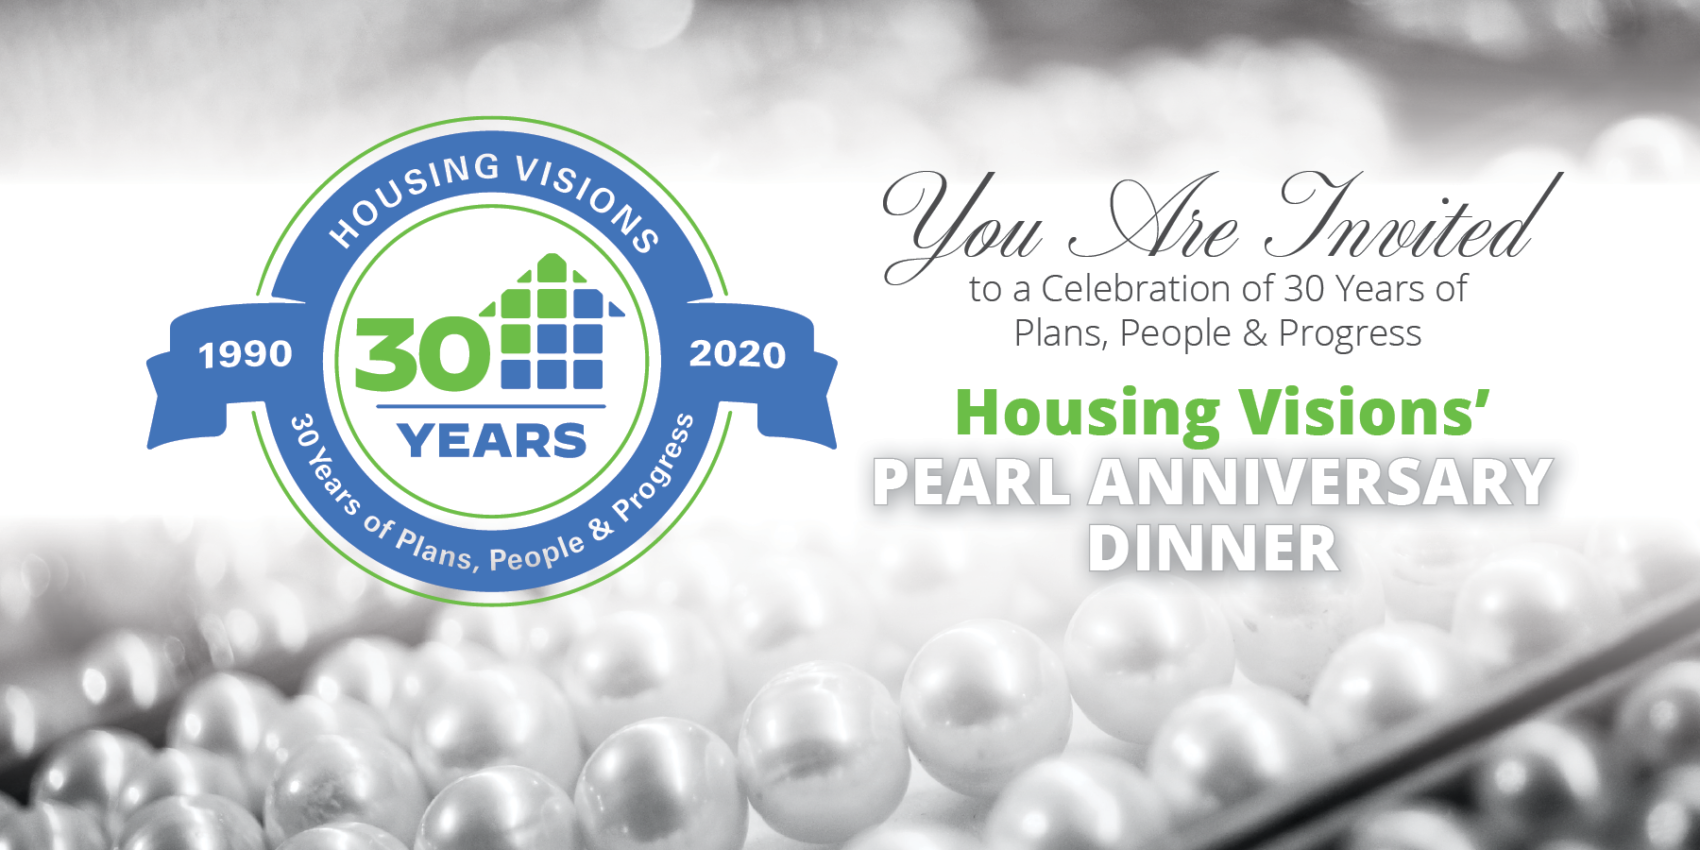 Housing Visions’ Pearl Anniversary Event: Celebrating 30 Years of Plans, People & Progress